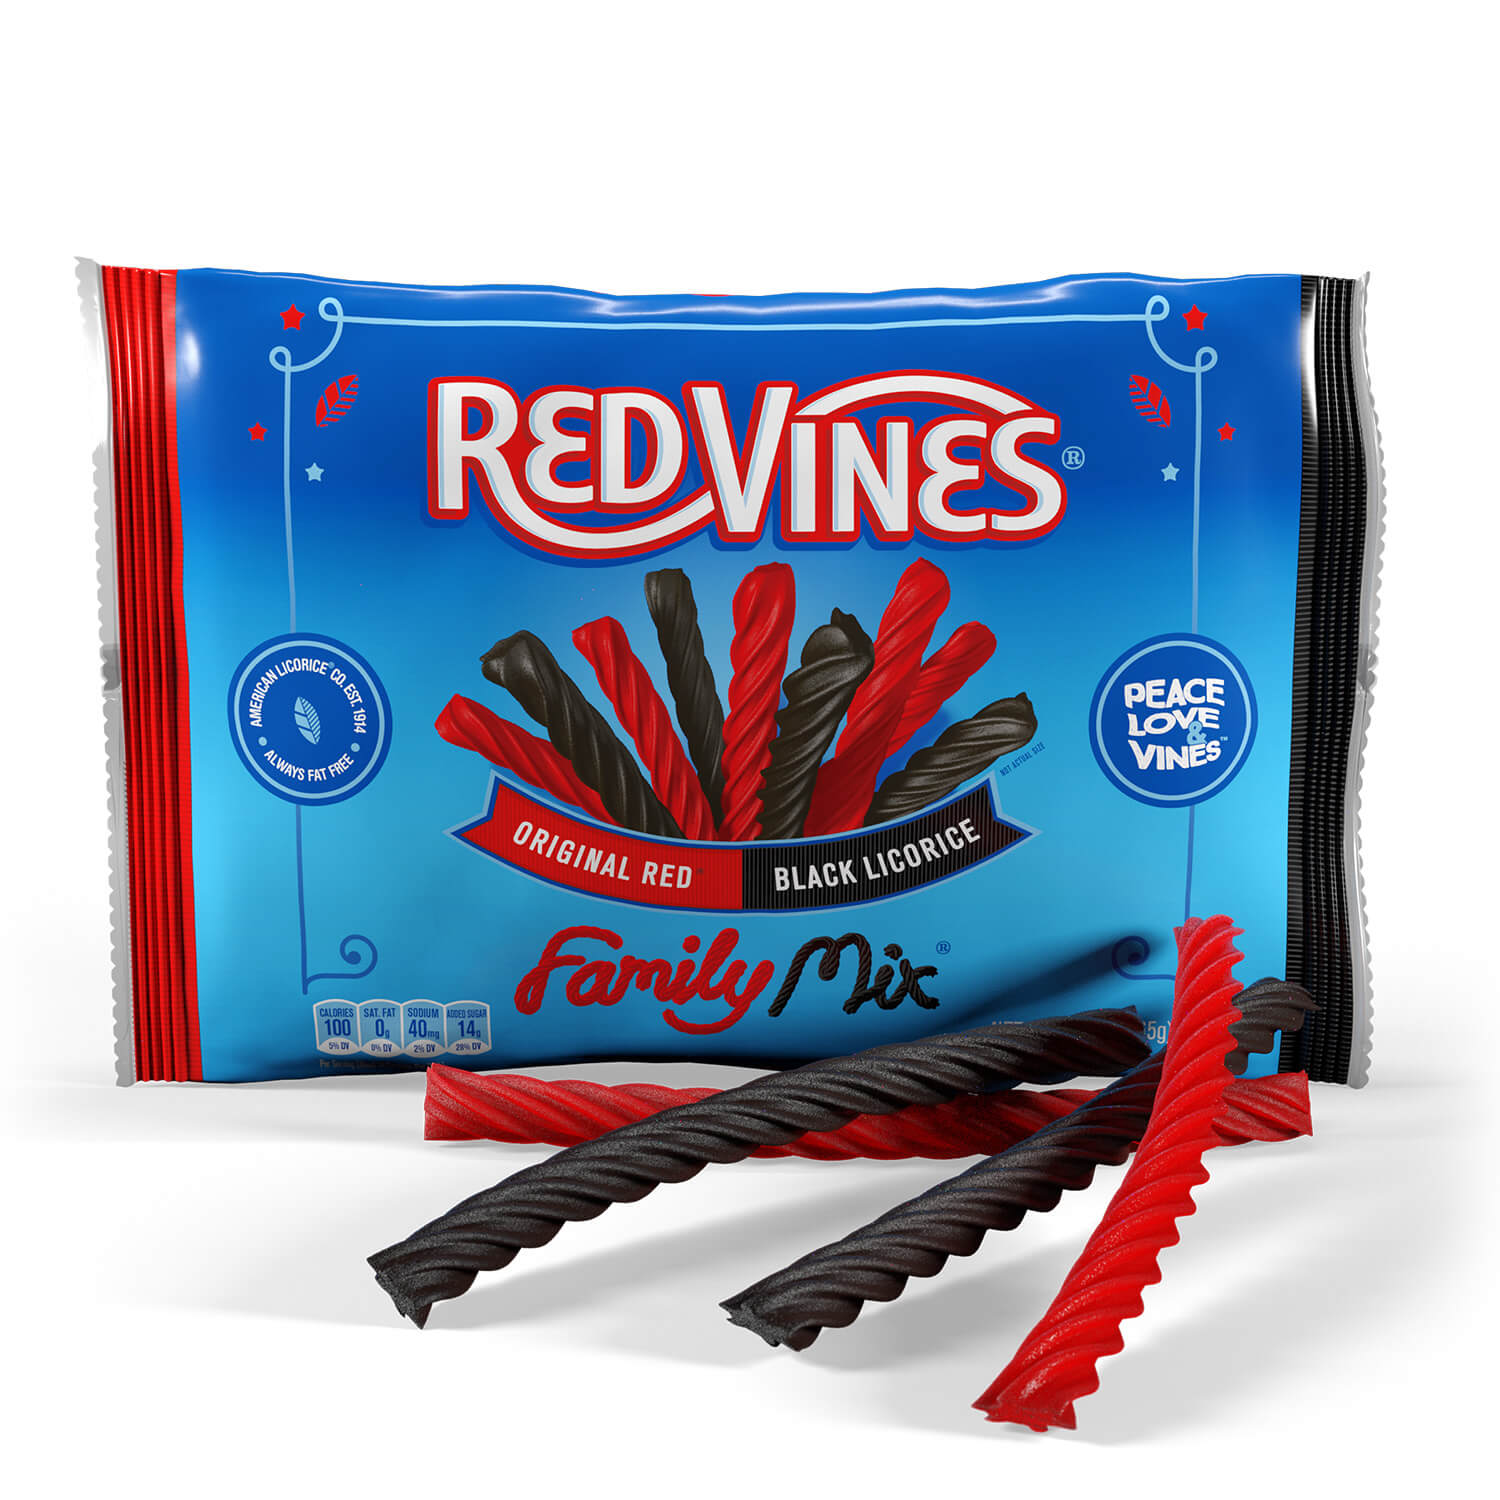 Red Vines Twists Family Mix Red & Black Licorice Candy, 27oz - image 3 of 8